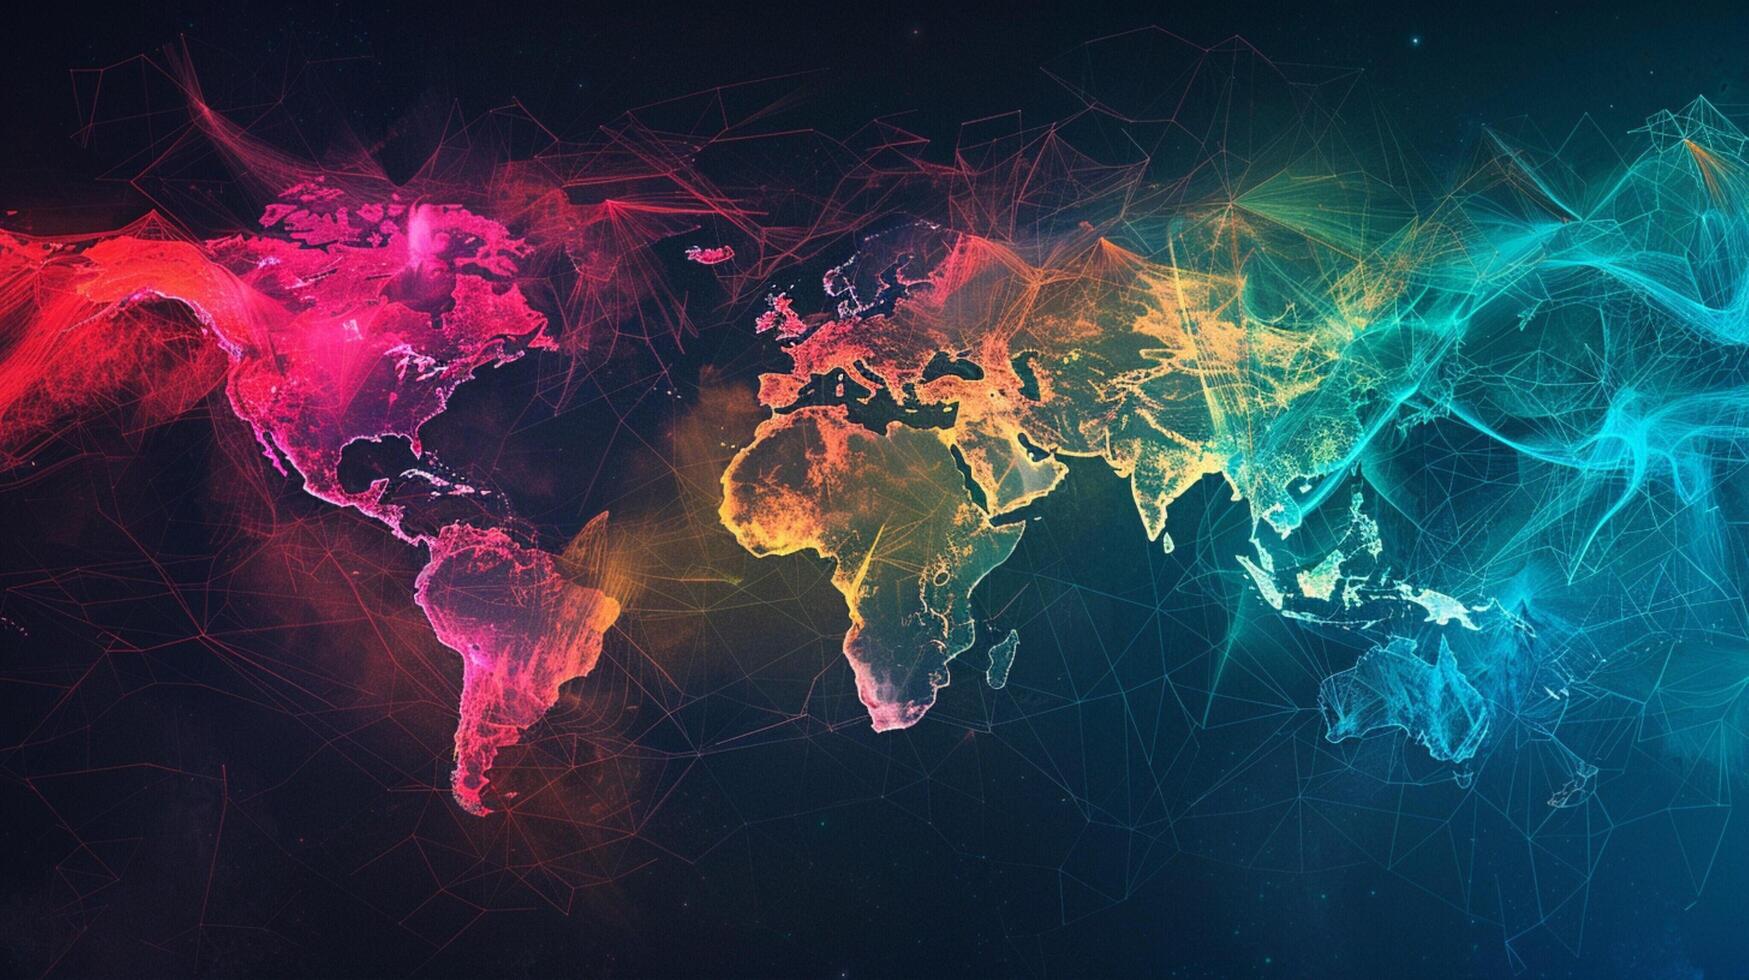 abstract digital world map with vibrant colors photo